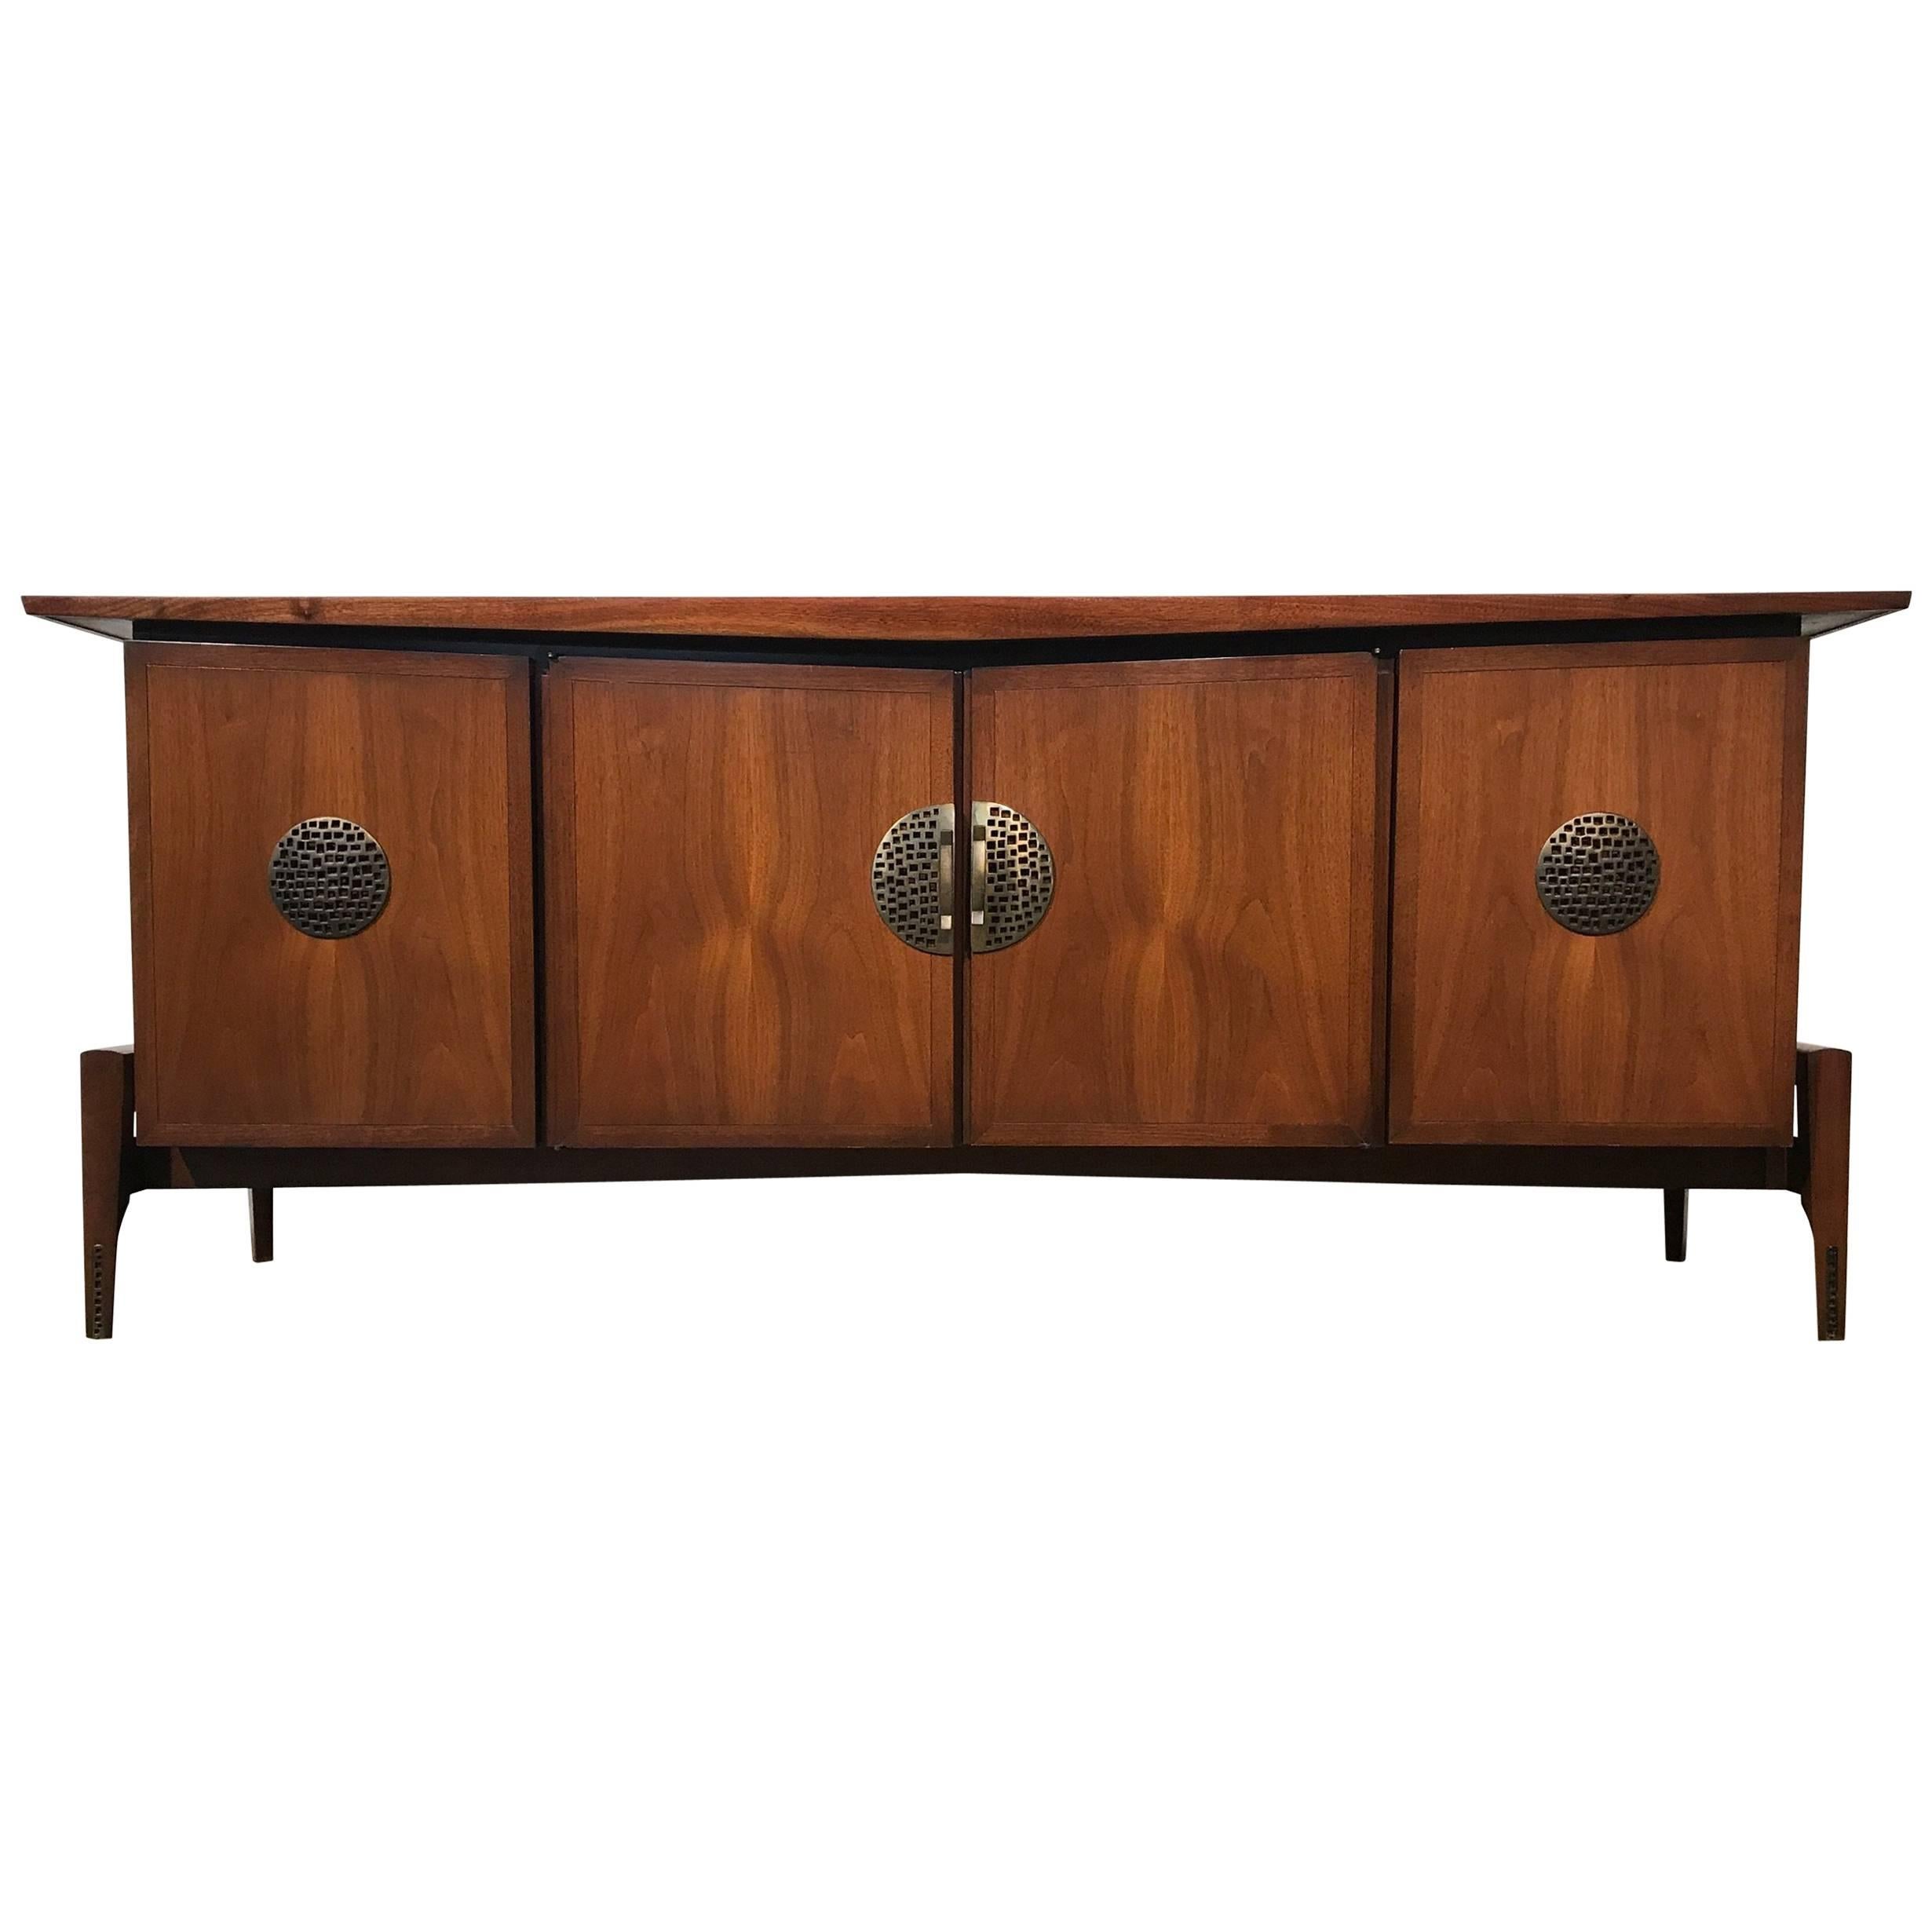 Sophisticated Mid-Century Modern Credenza Asian Flair Hobey Helen Baker